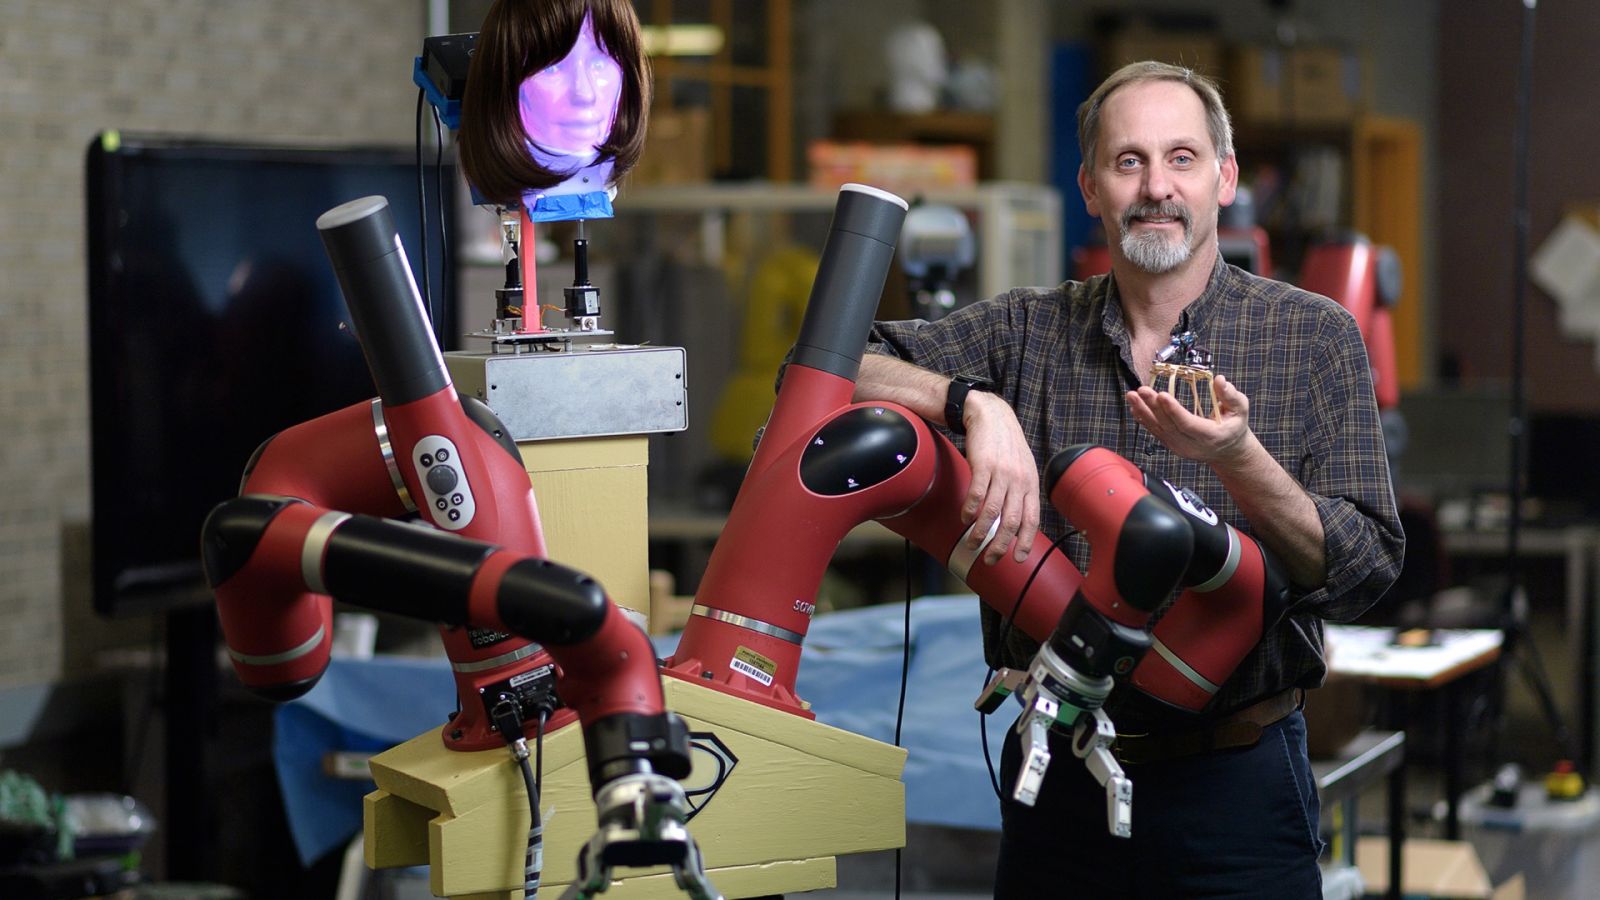 Richard Voyles stands with two examples of his research in robotics, Super Baxter (left) and NeUromorphic Computing on Laminated Electronic Organic substrate (NUCLEOs) in his hand. (Purdue University photo/John Underwood)